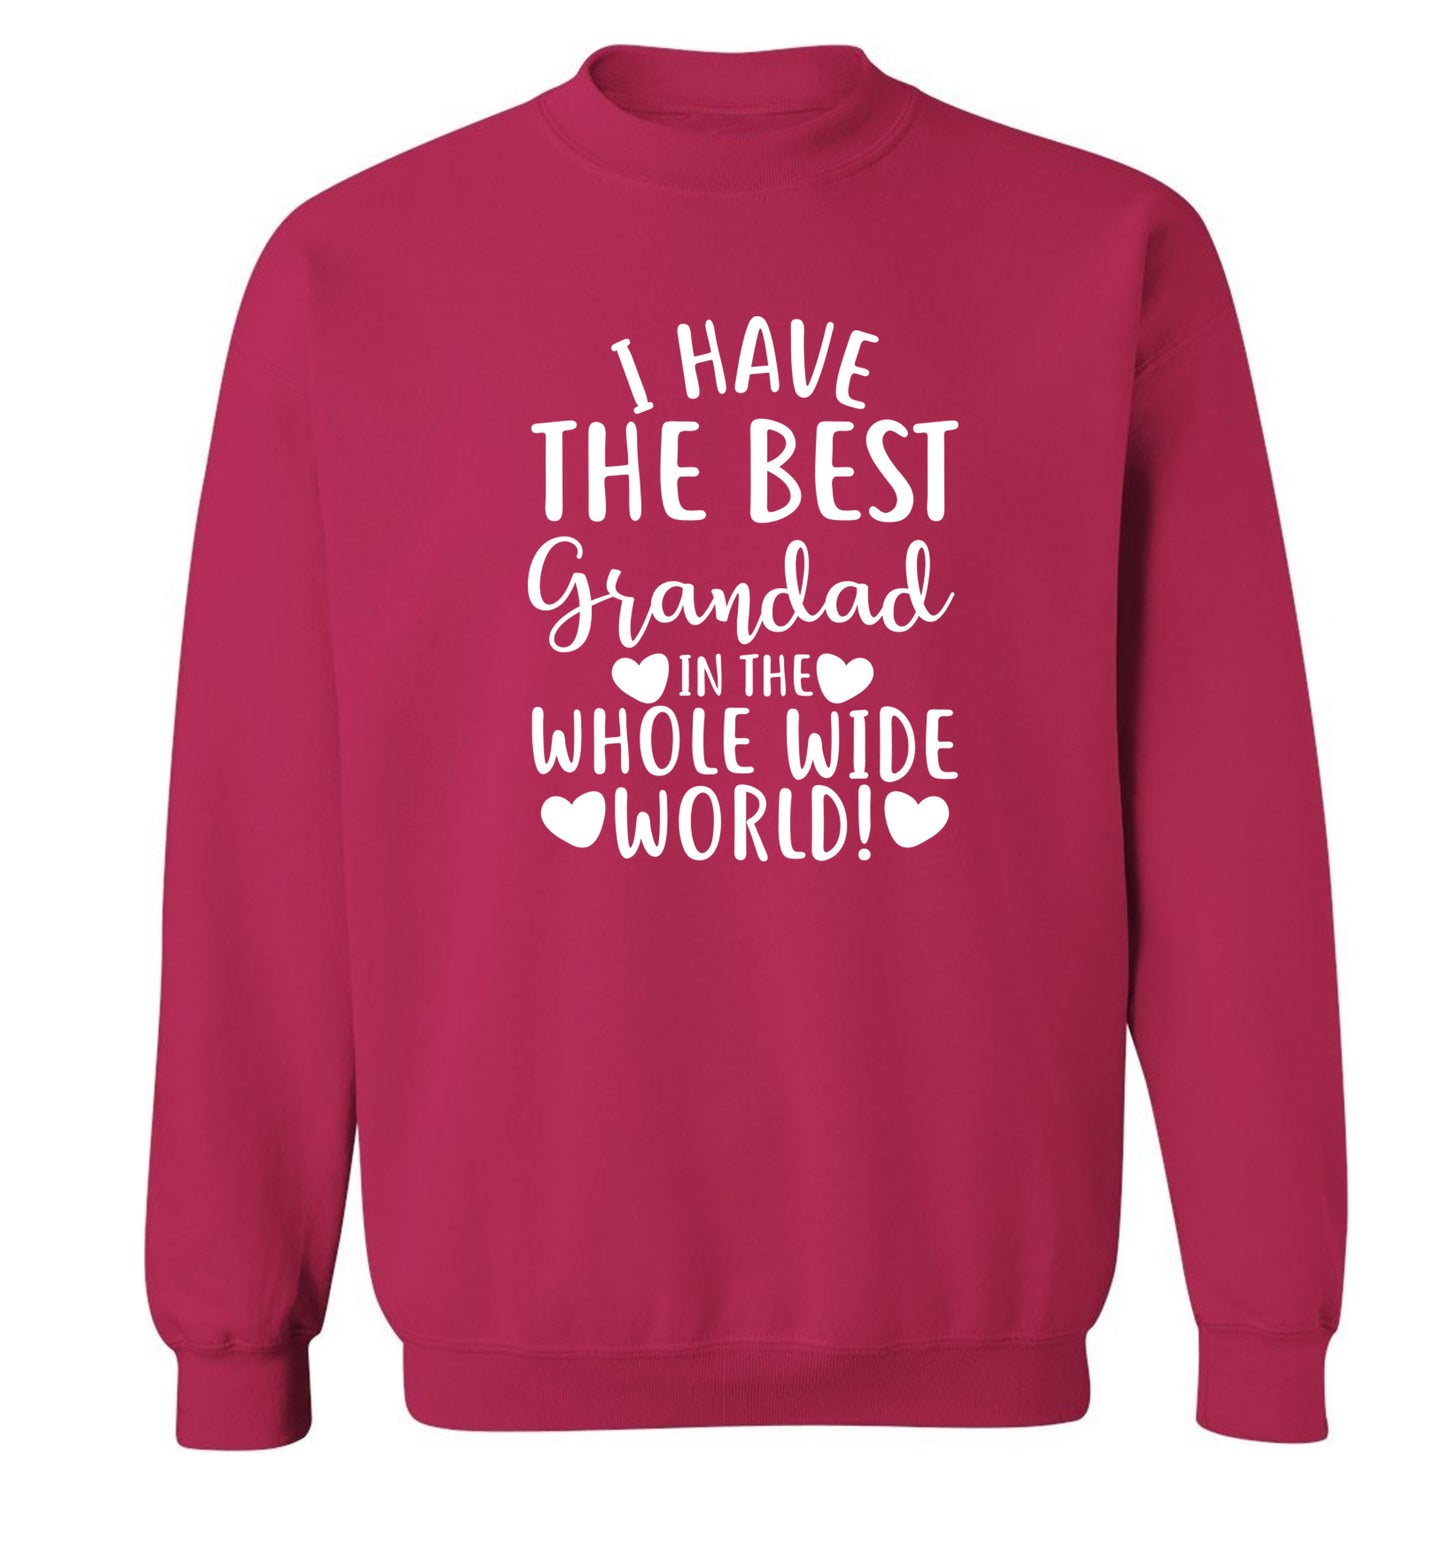 I have the best grandad in the whole wide world! Adult's unisex pink Sweater 2XL